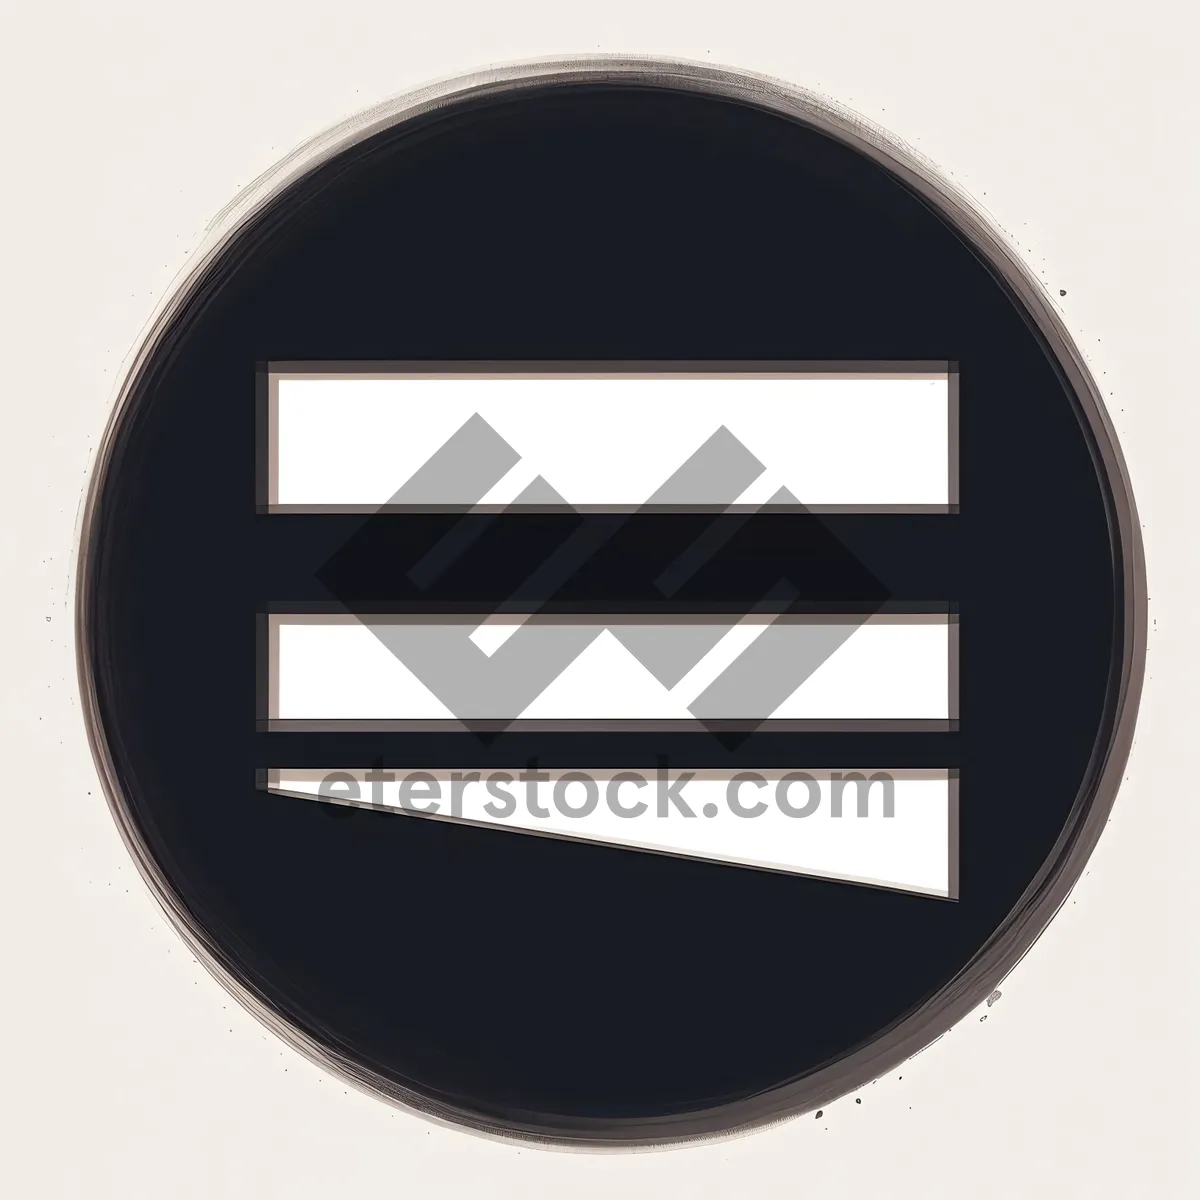 Picture of Glossy Metallic 3D Web Button Icon